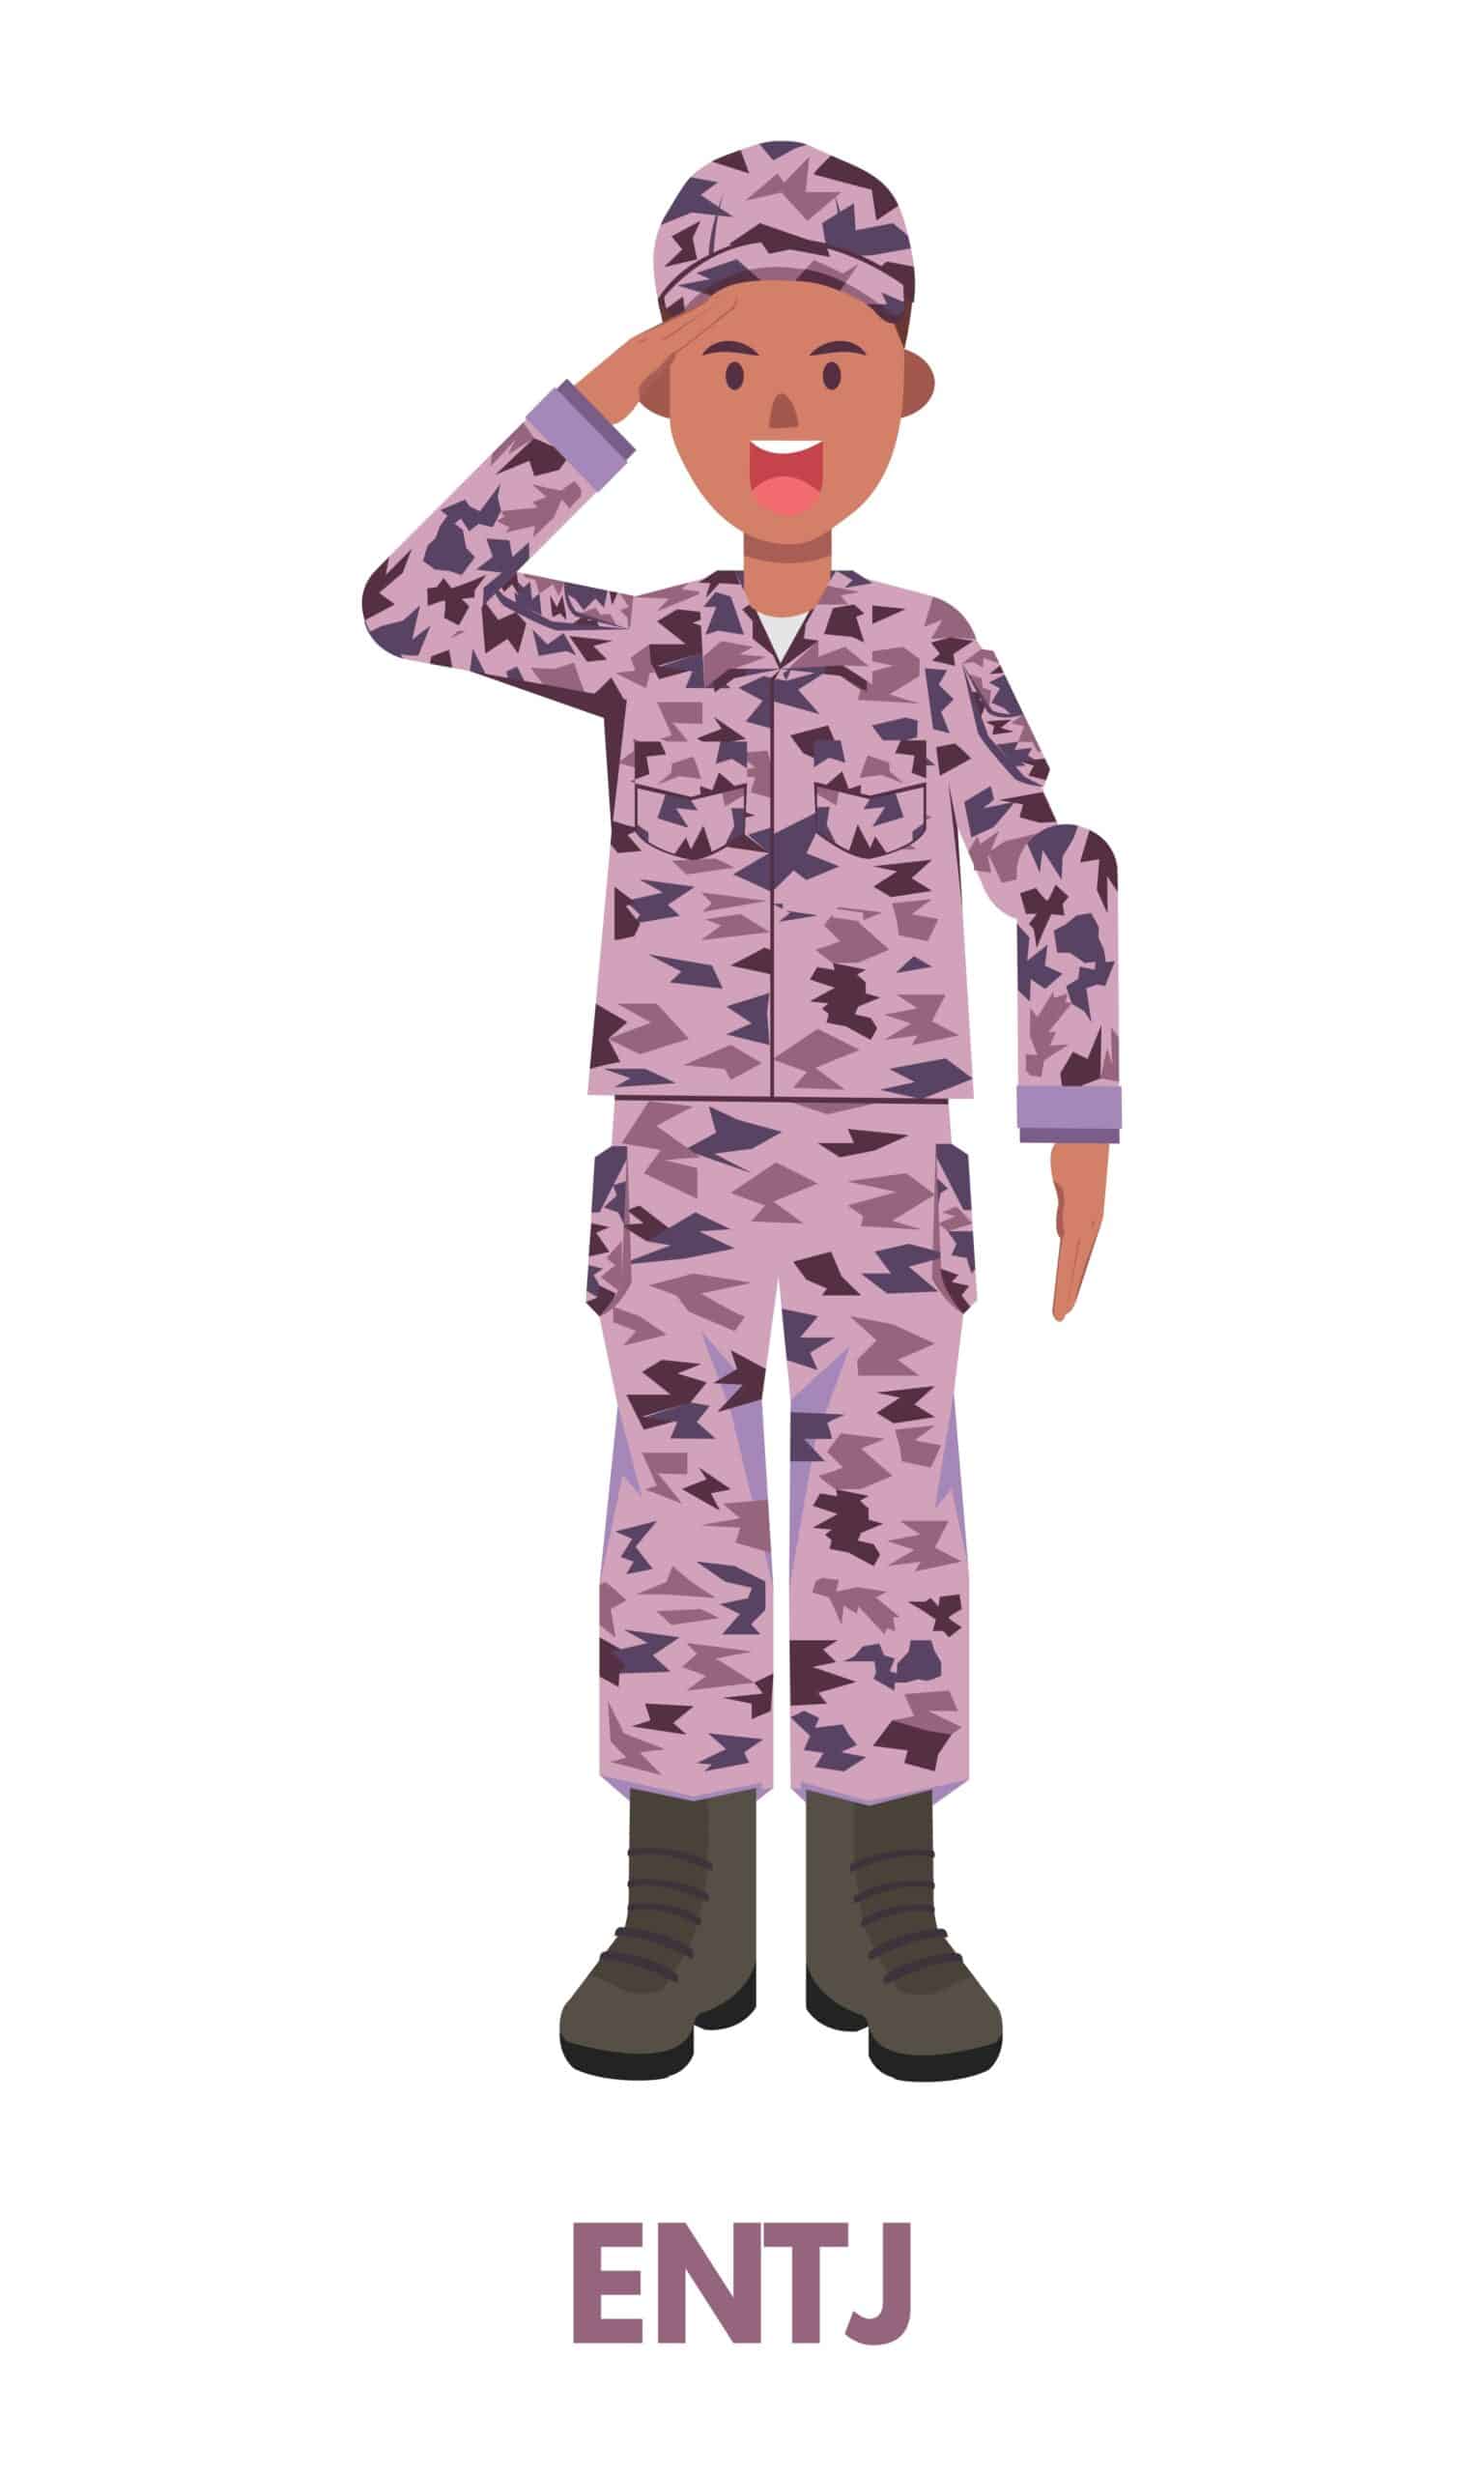 Military,Man,Commander,In,Purple,Clothing,Doing,Salute,Represents,Entj